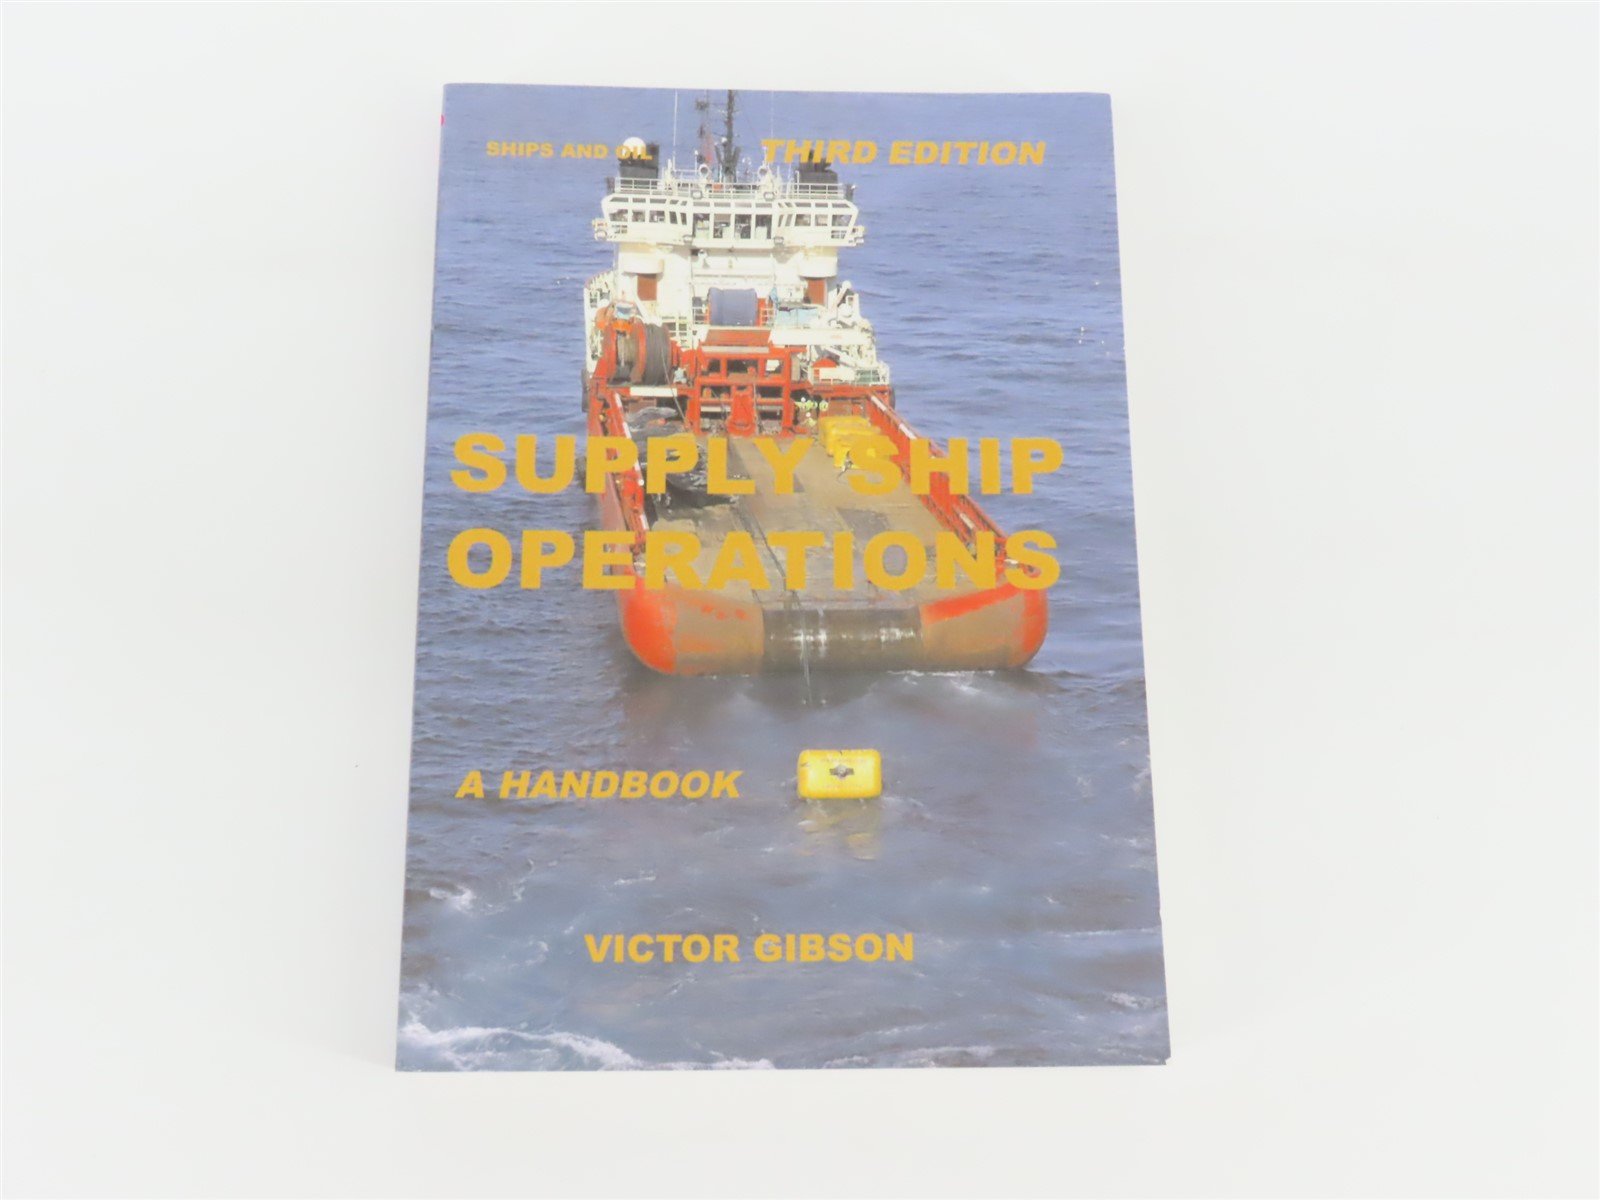 Supply Ship Operations by Victor Gibson ©2009 SC Book